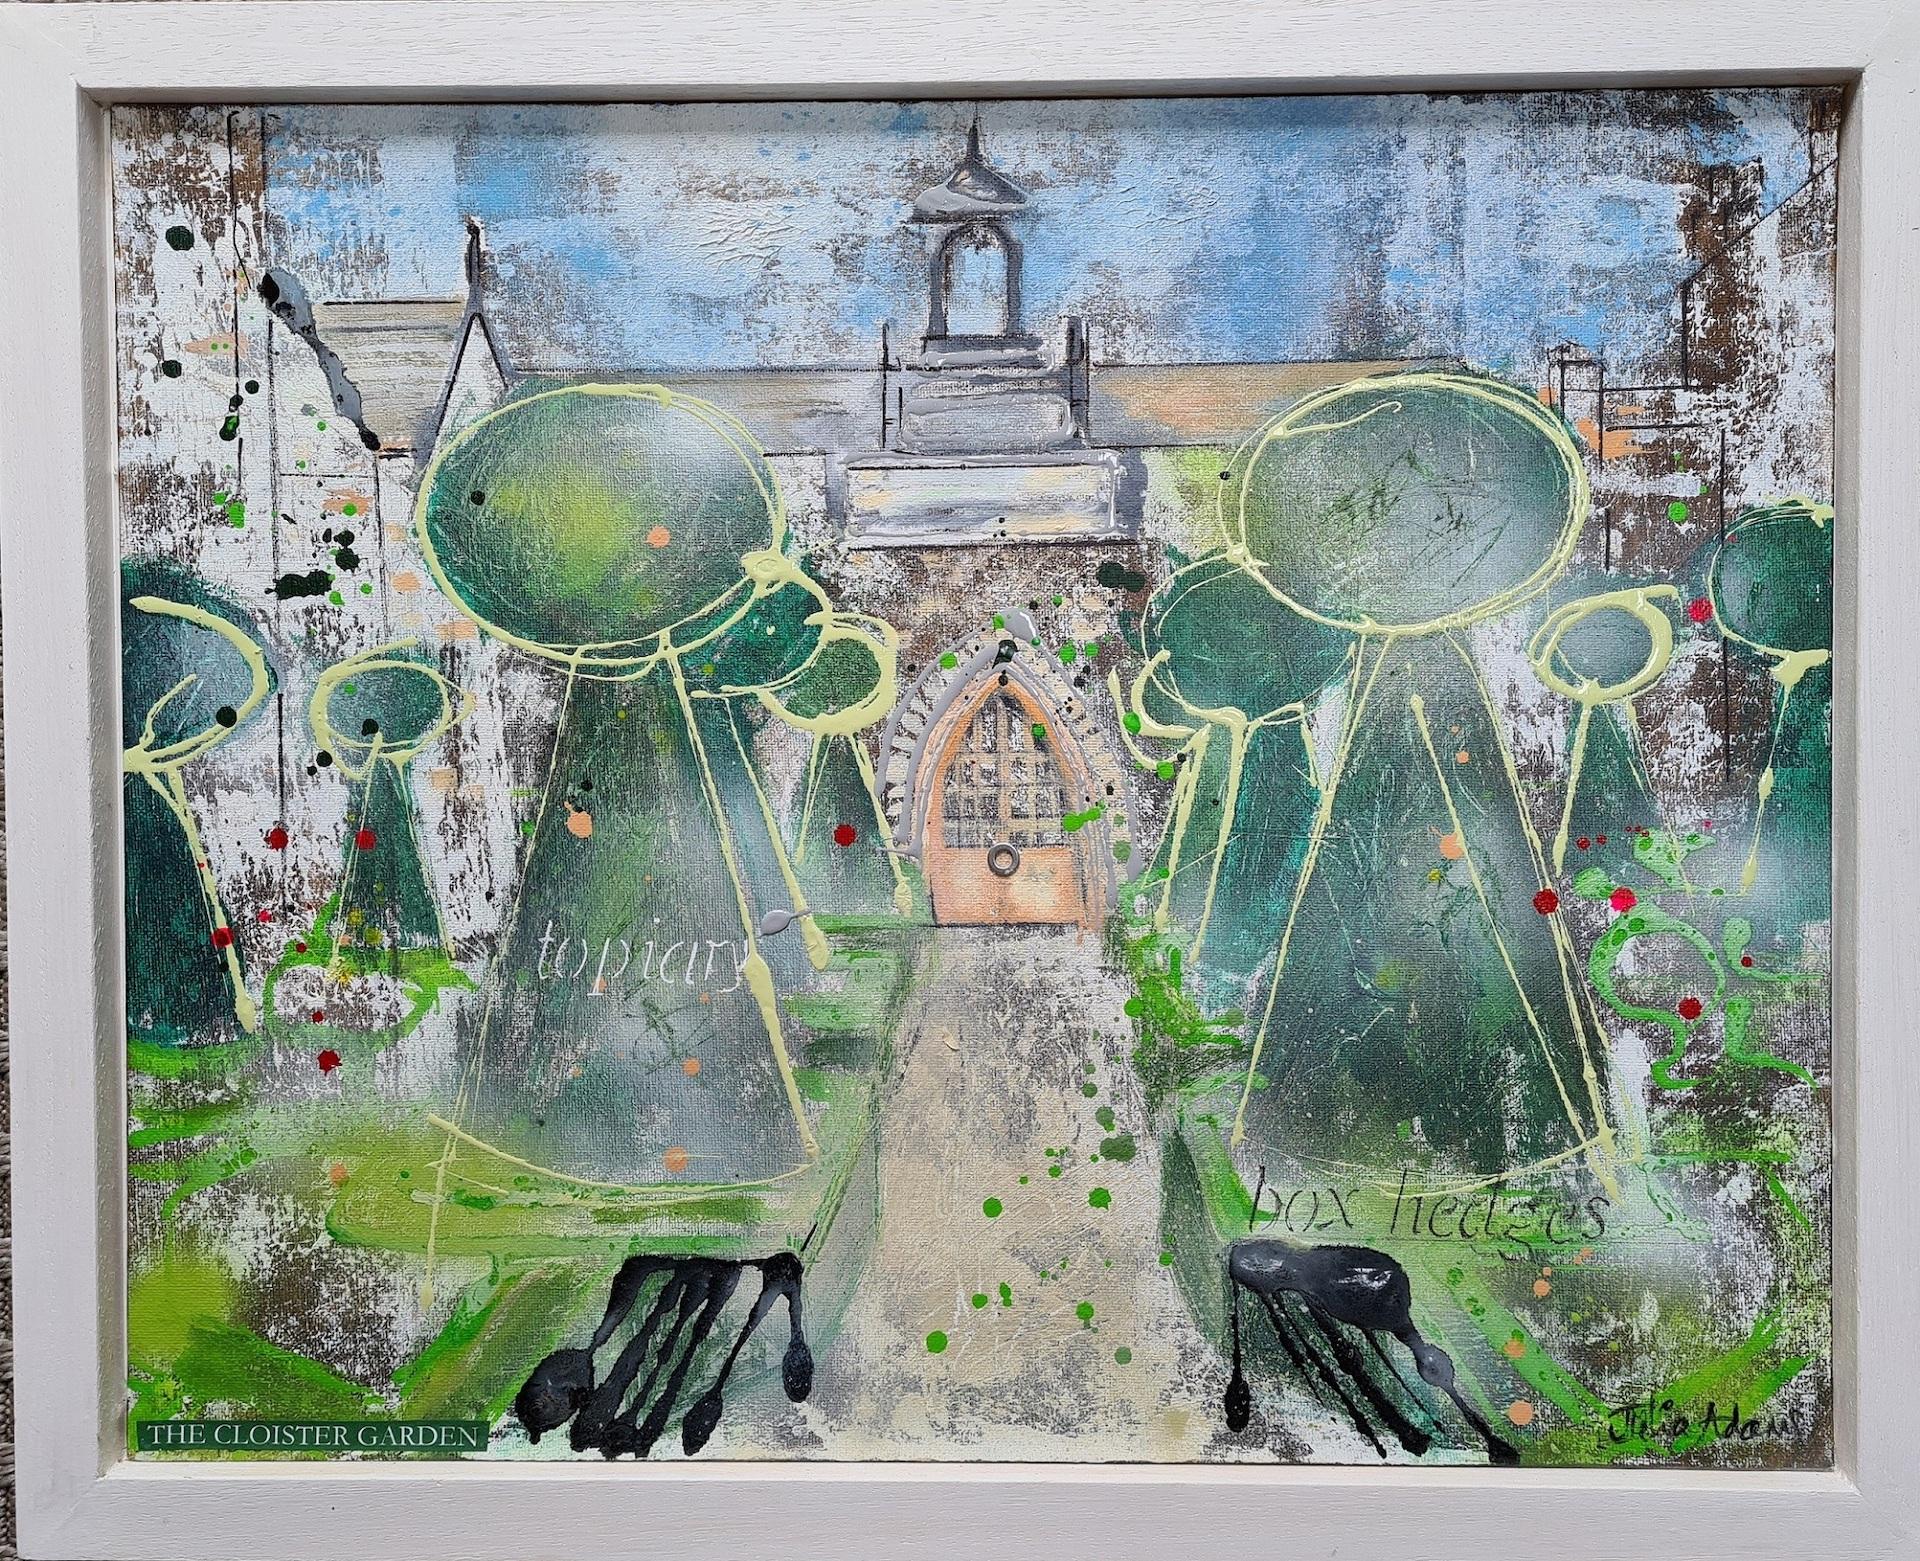 Julia Adams
The Cloister Garden
Original Architectural Painting
Mixed Media with Acrylic Inks on Canvas Board in painted white wood frame
Canvas Size: H 40cm x W 50cm
Sold framed
Please note that in situ images are purely an indication of how a